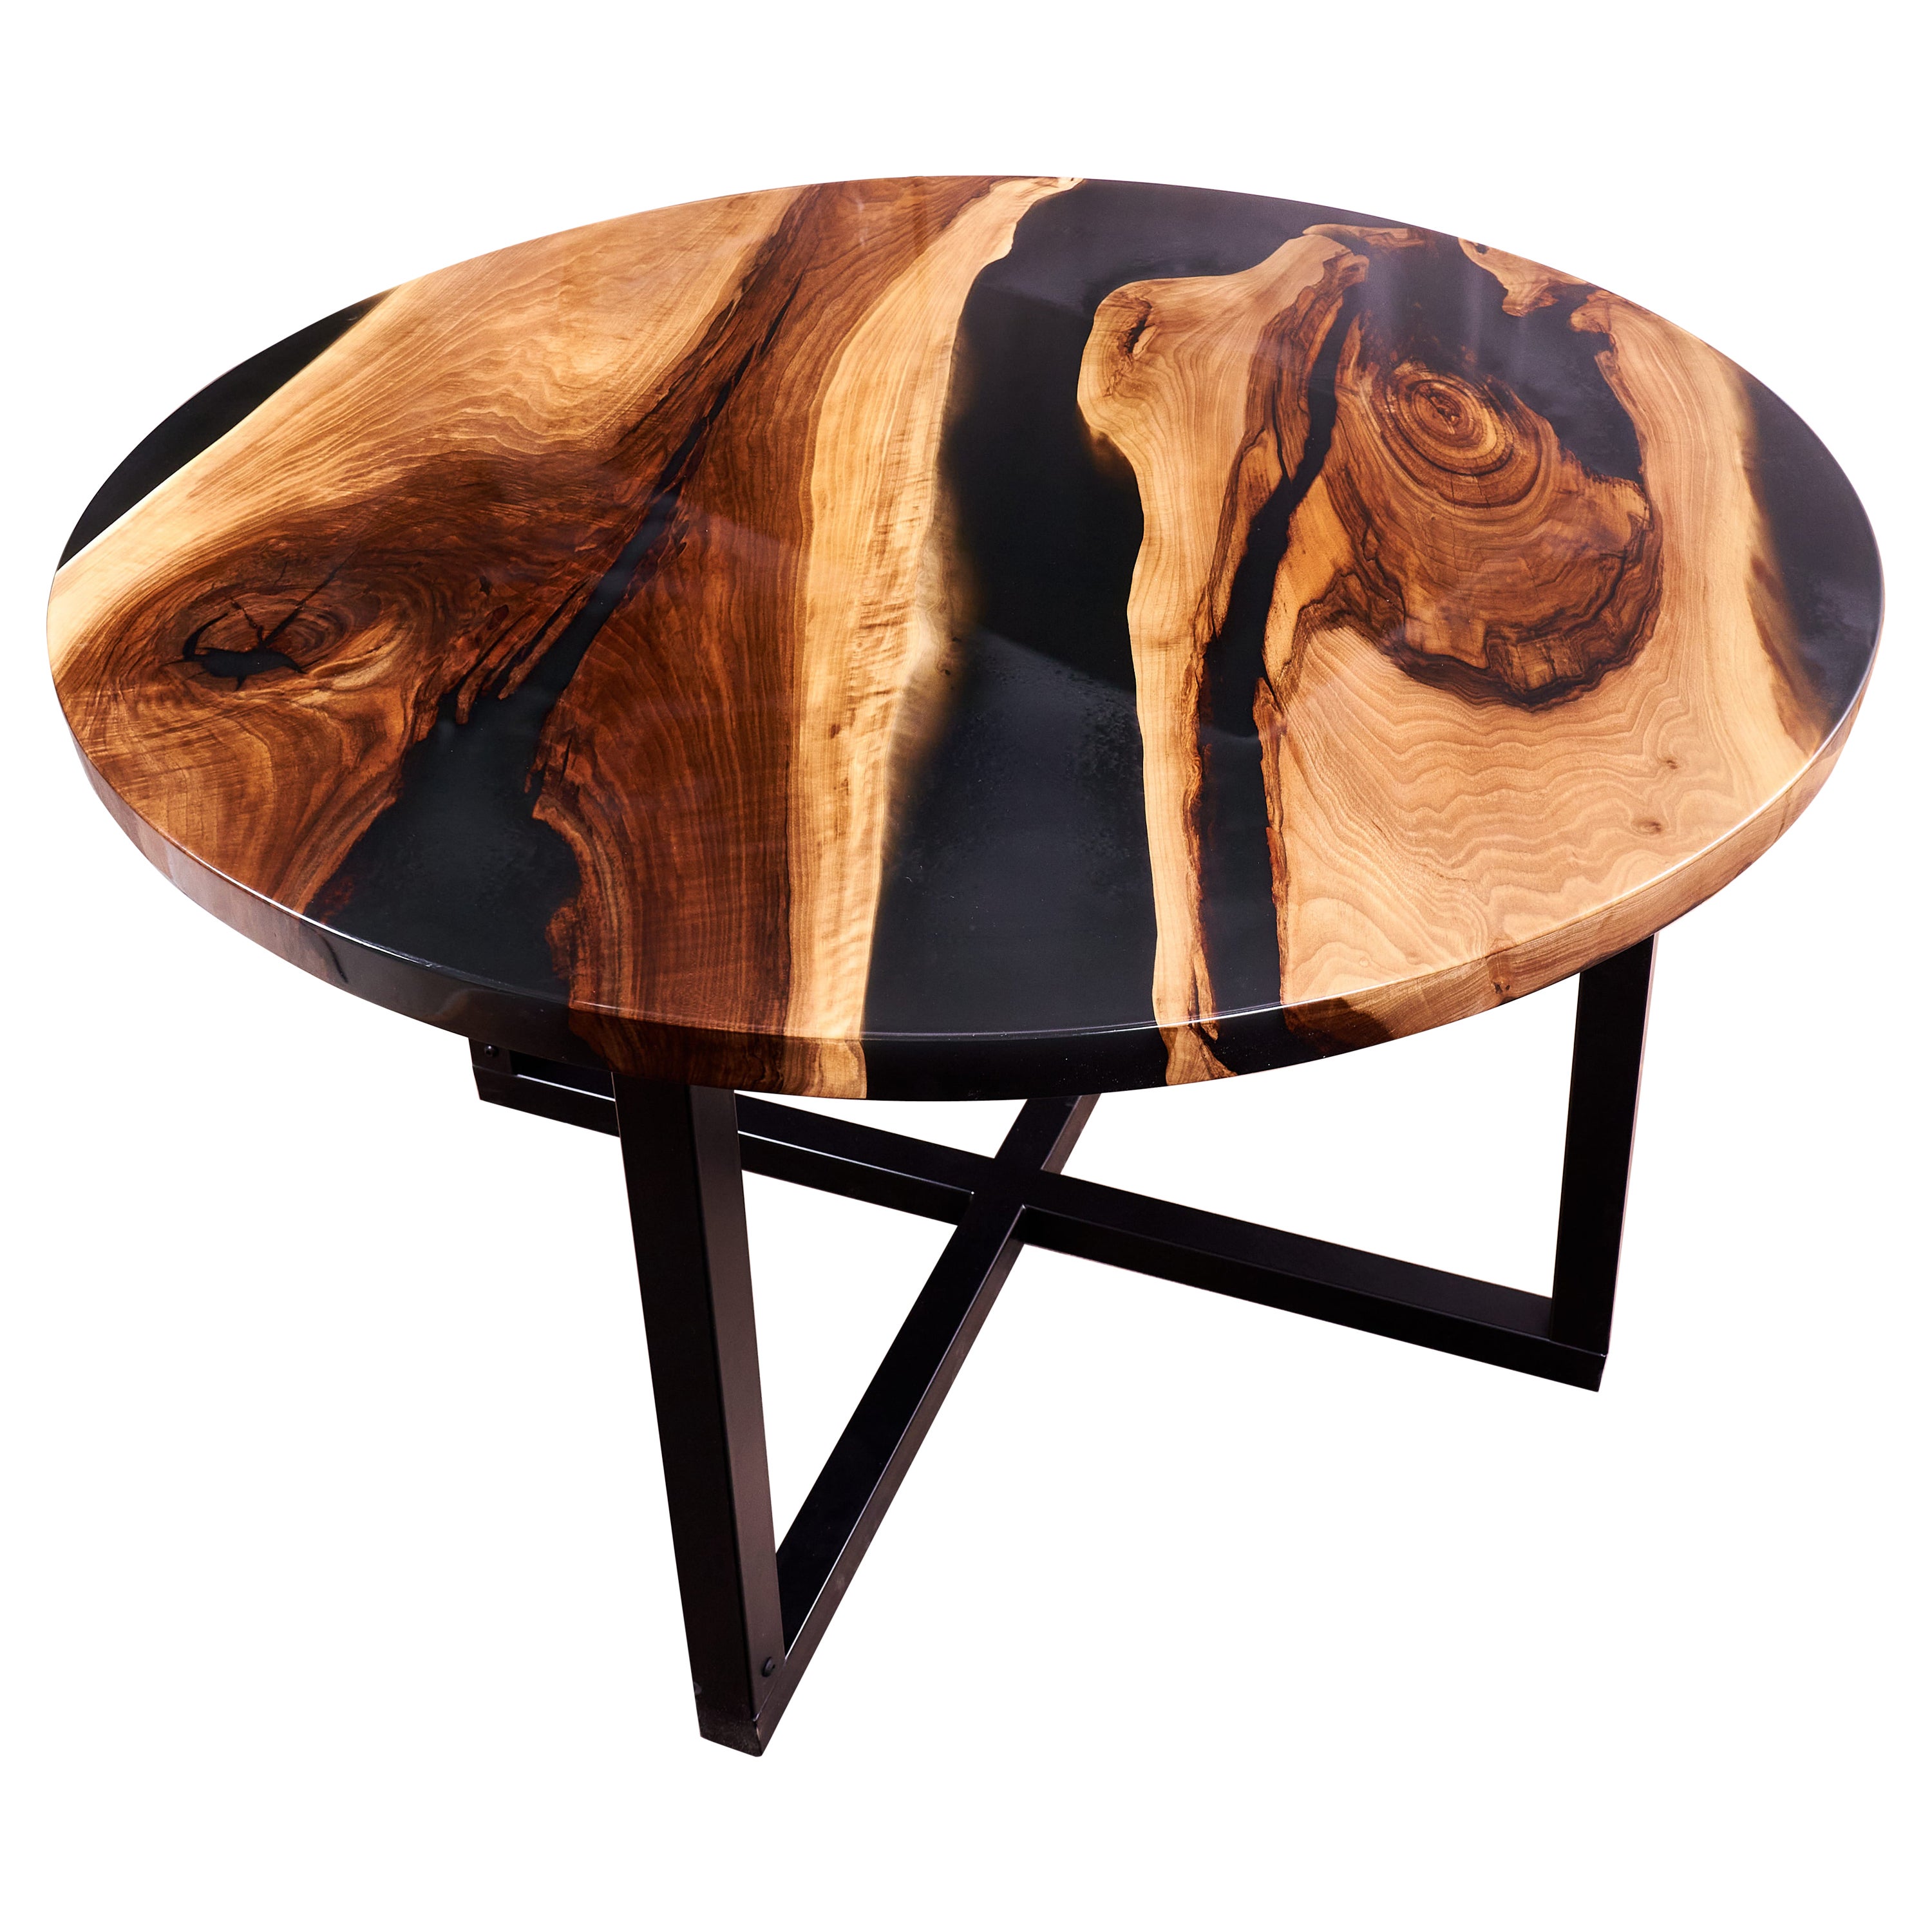 Contemporary Round Dining Table Walnut Mid Century Modern Style Table For Sale